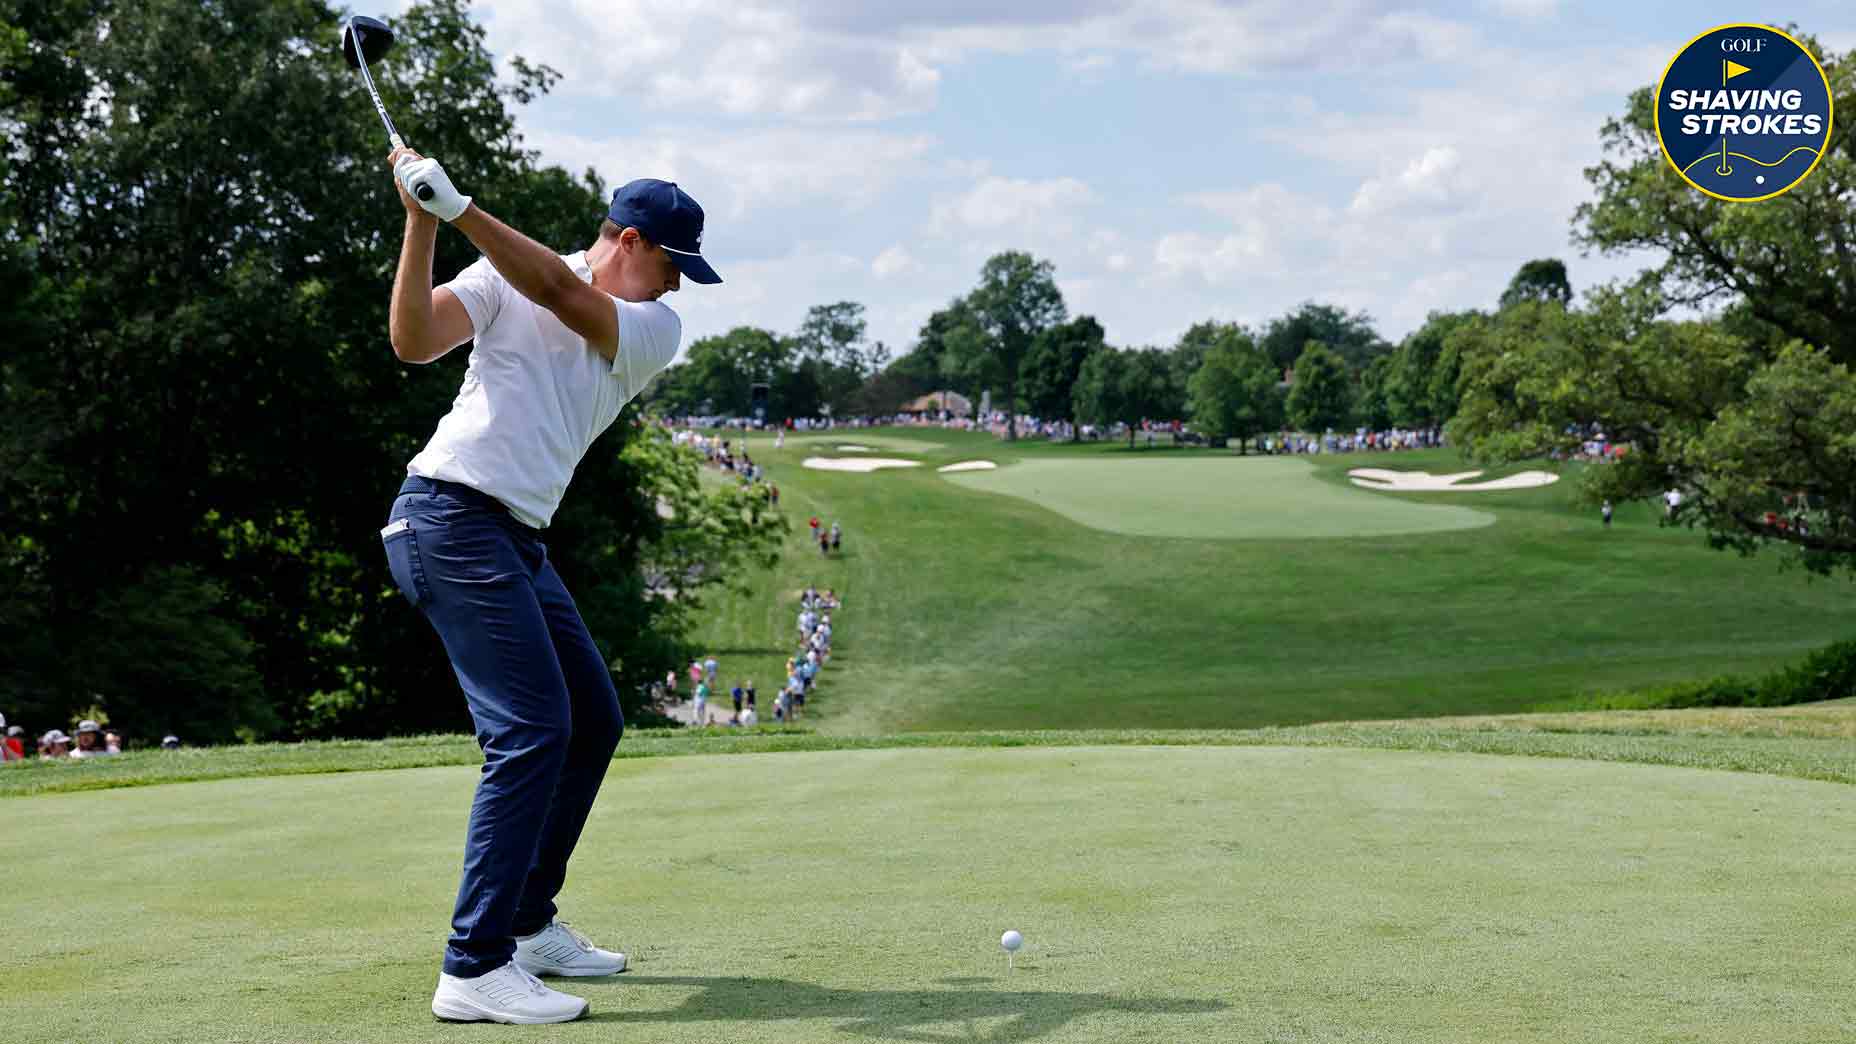 Most amateurs forget this key swing element. Here's how to avoid that mistake